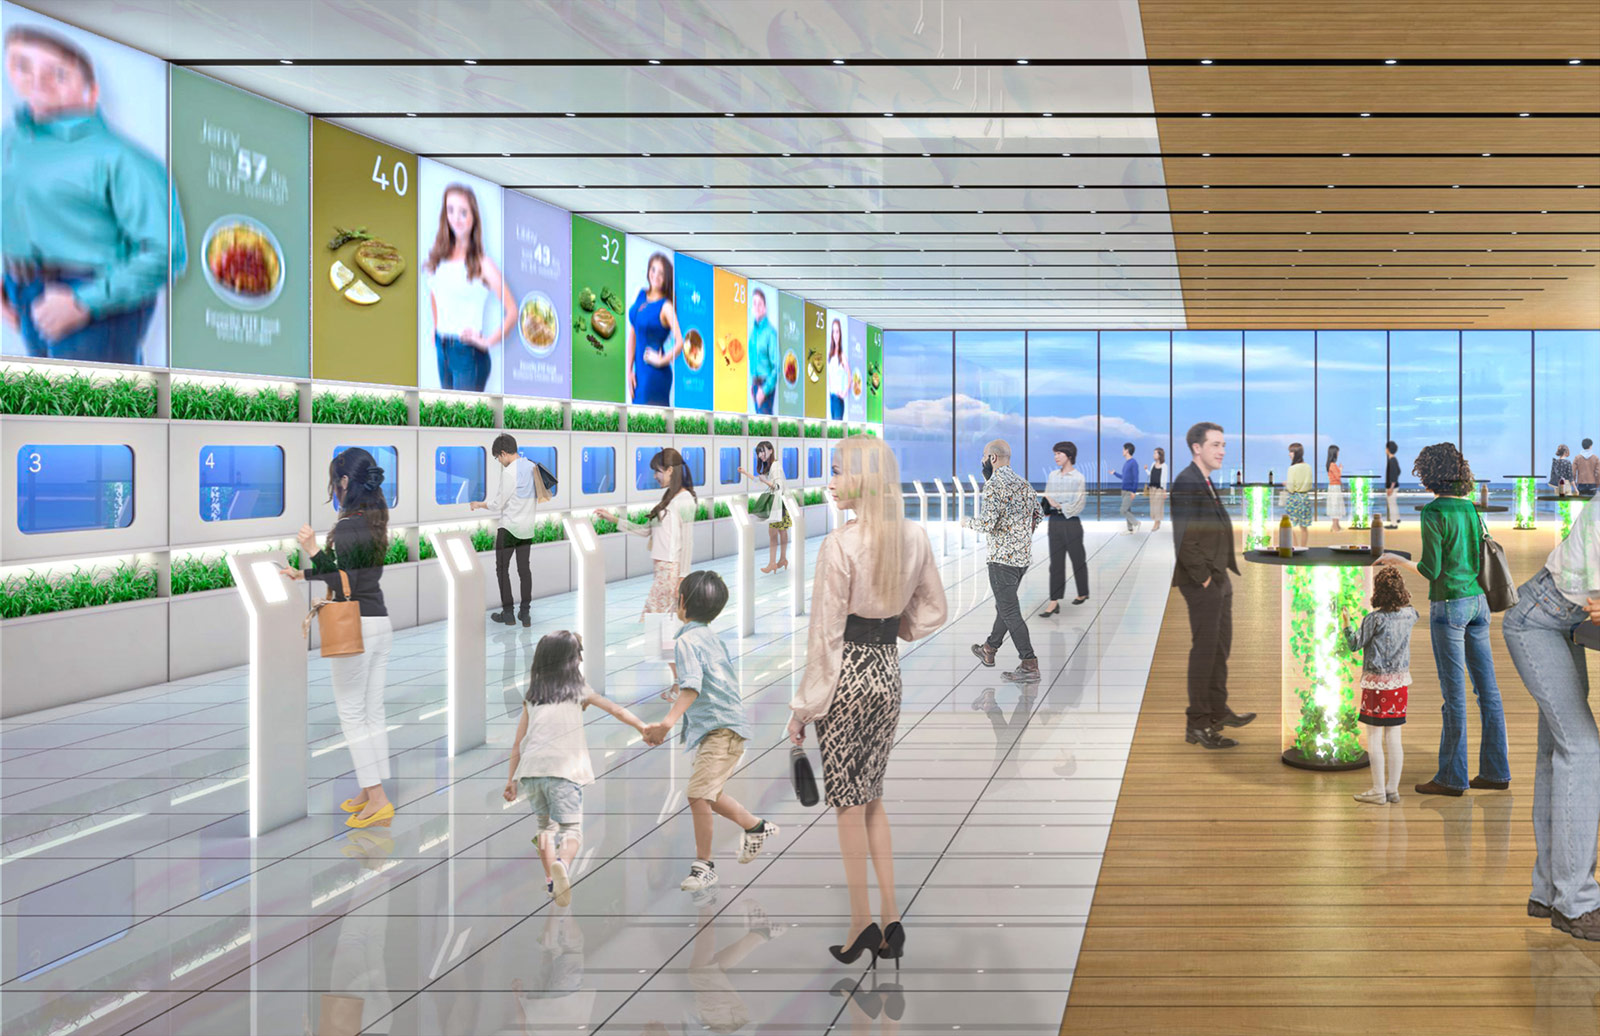 An artist’s impression of the future of food section | Courtesy of Osaka Pavilion